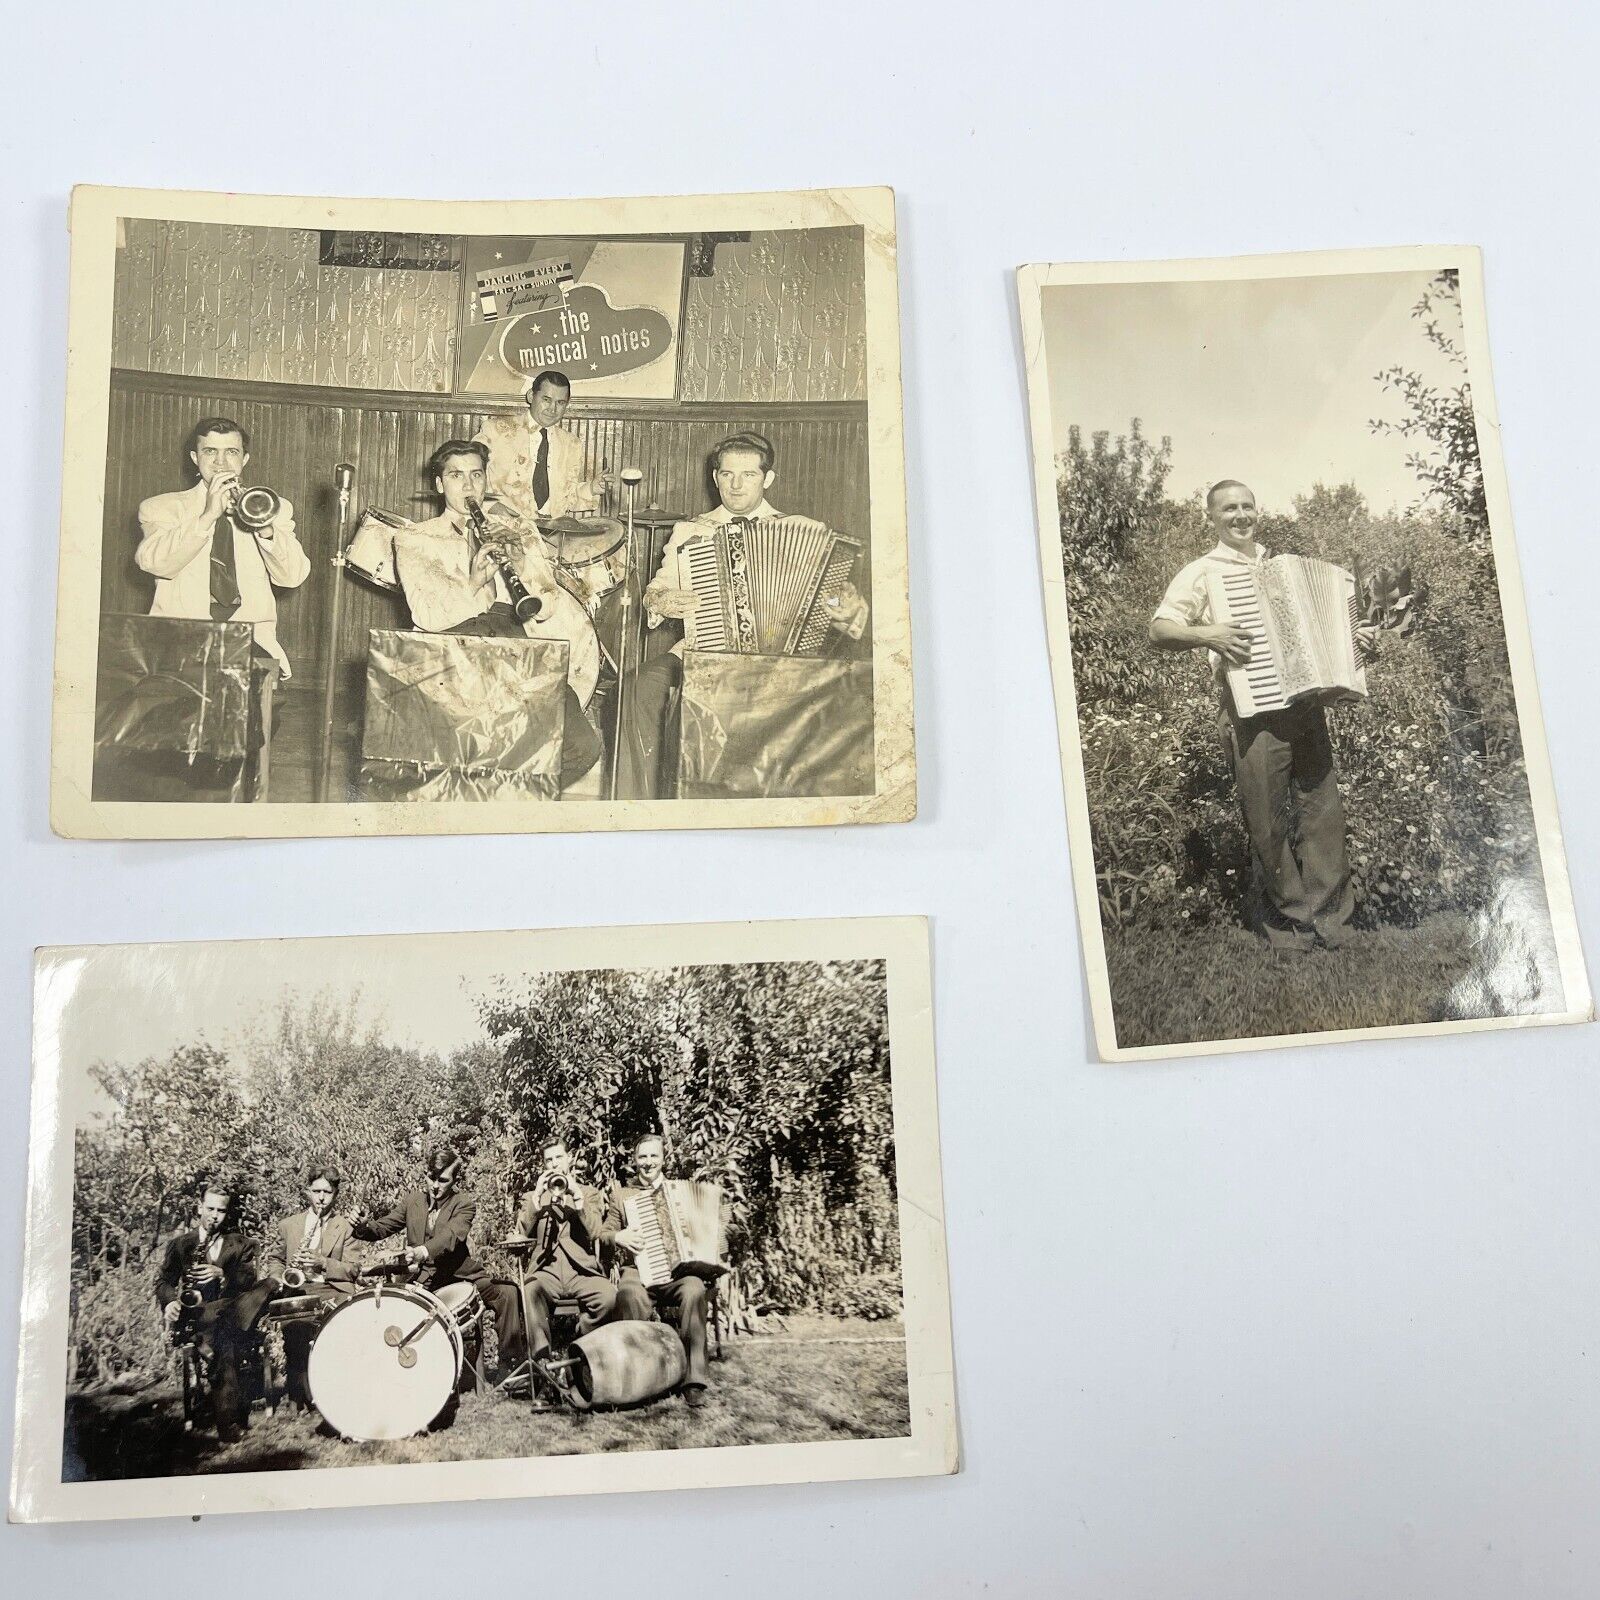 Vintage 1951 Black and White Photo The Musical Notes Band Jersey City and others